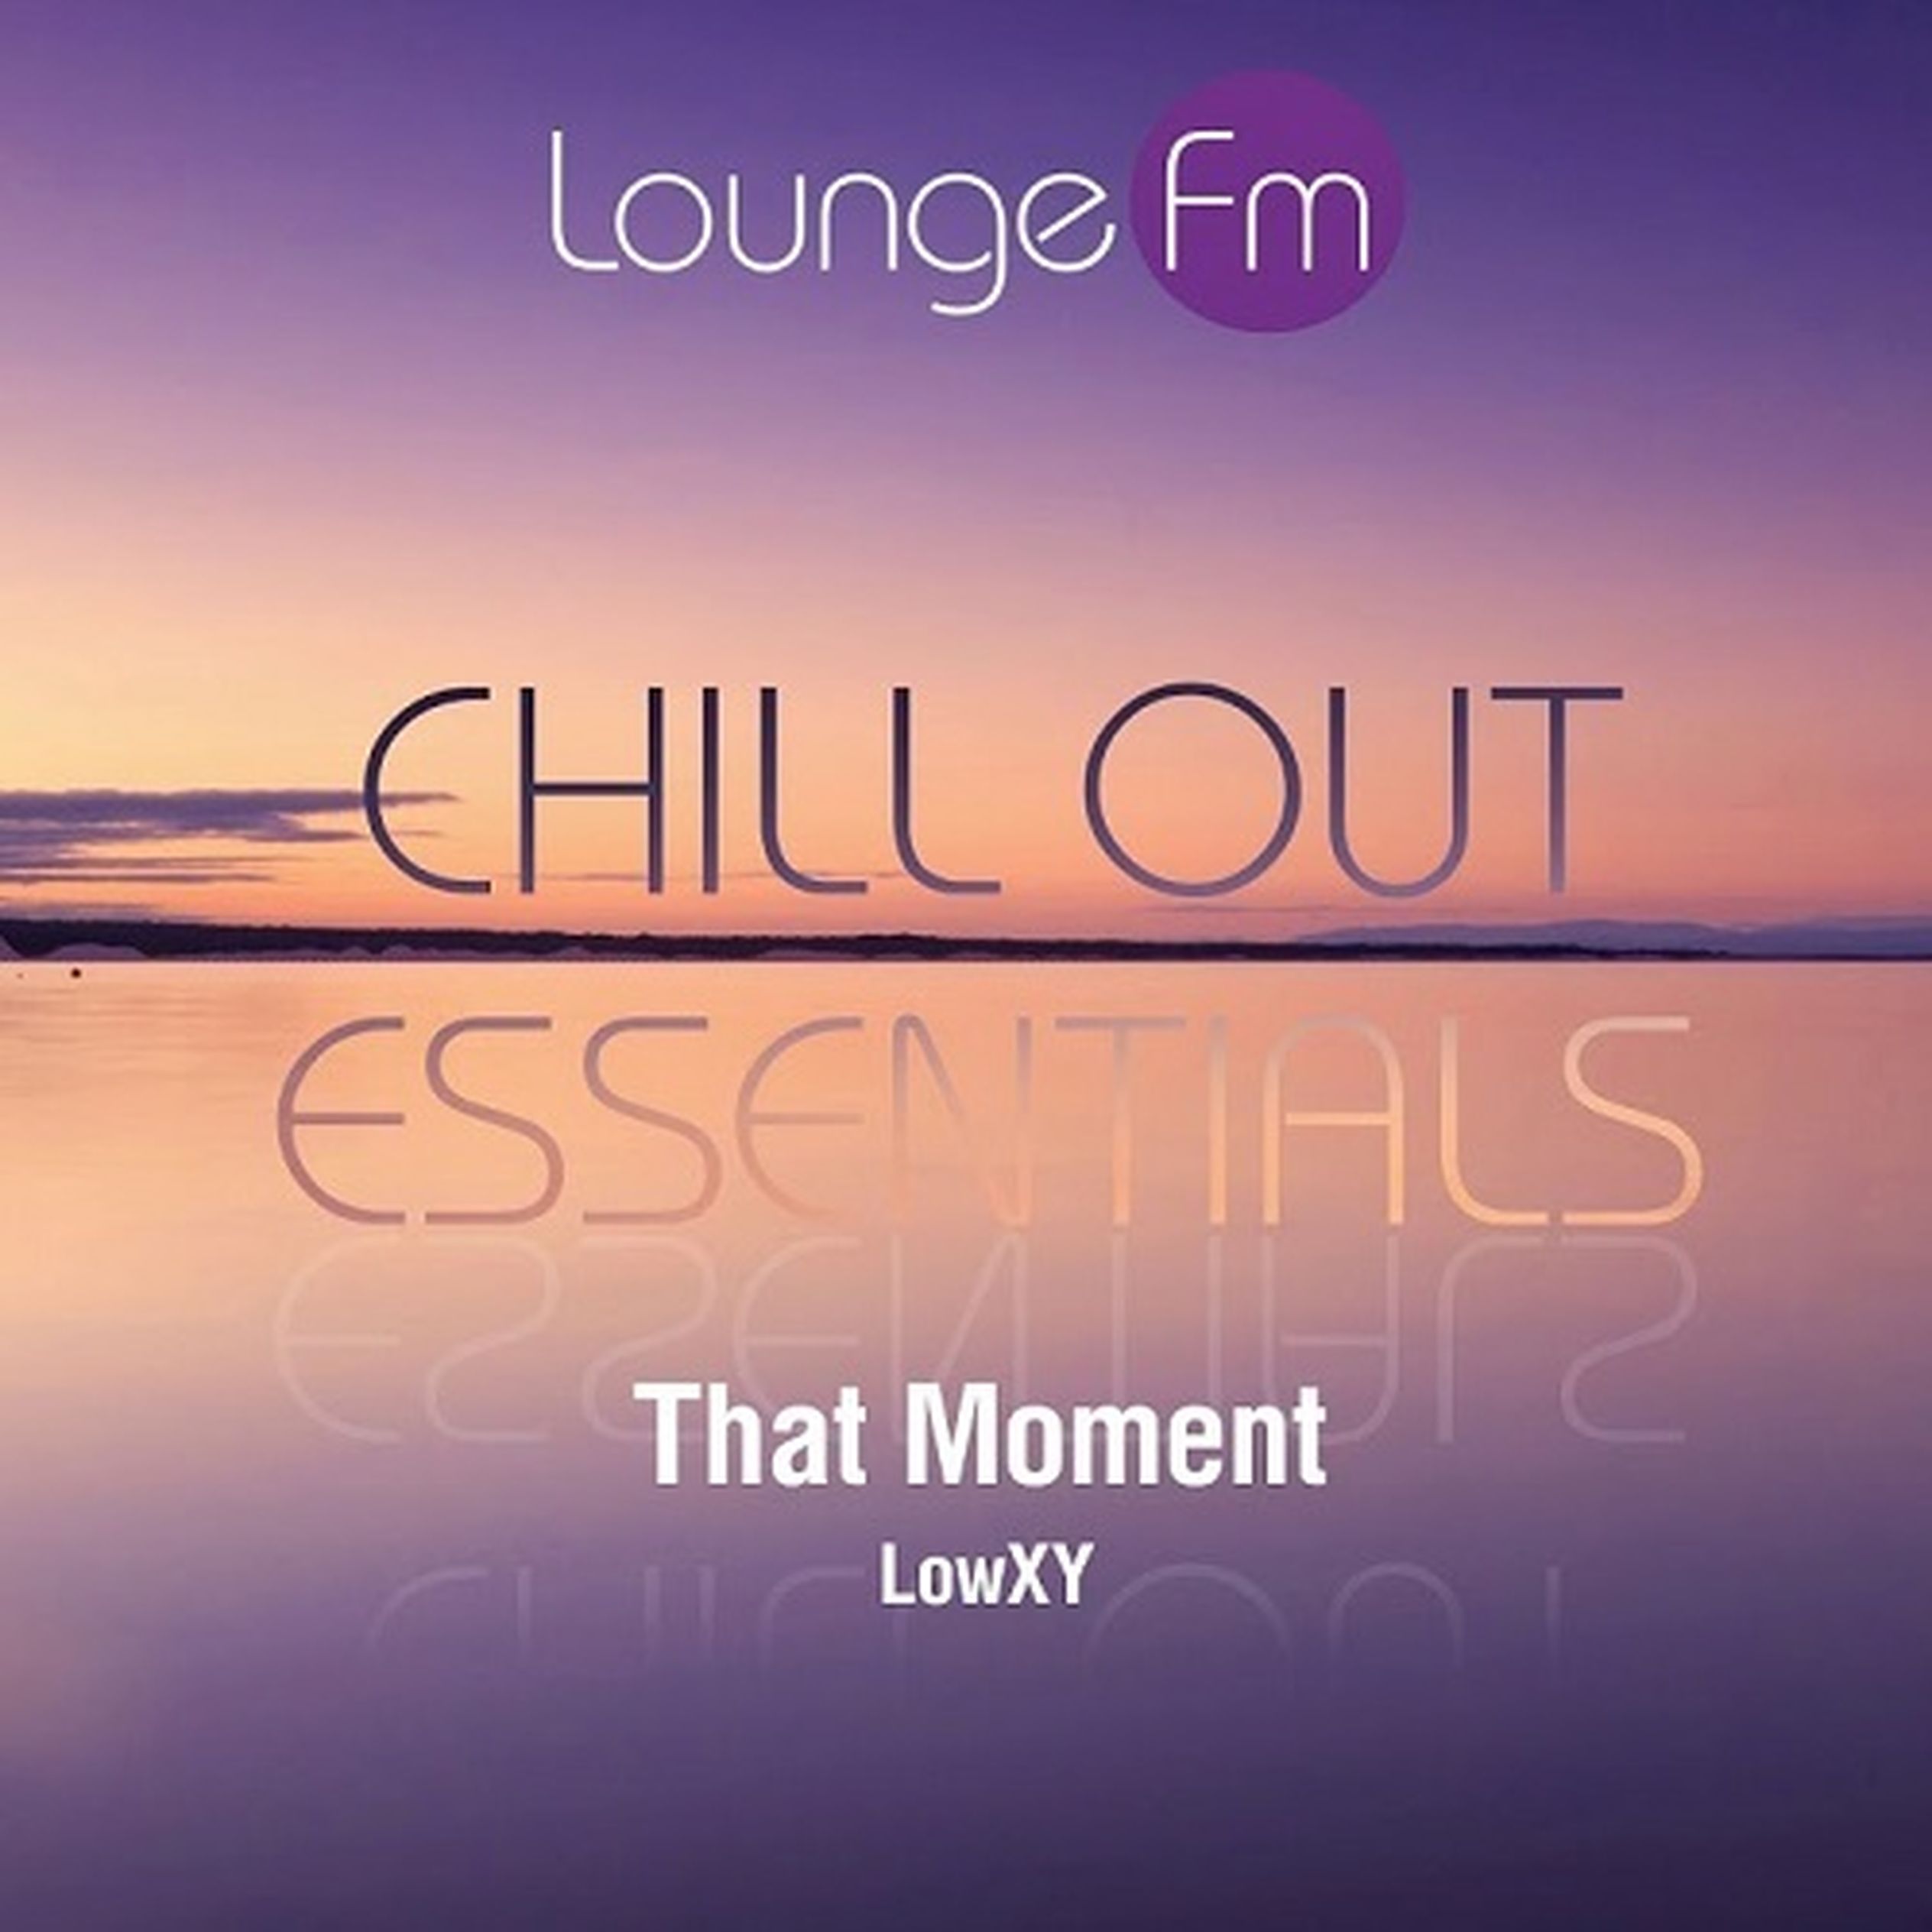 Chillout fm. Чил ФМ. Lounge fm. Chillout Lounge Пятигорск.